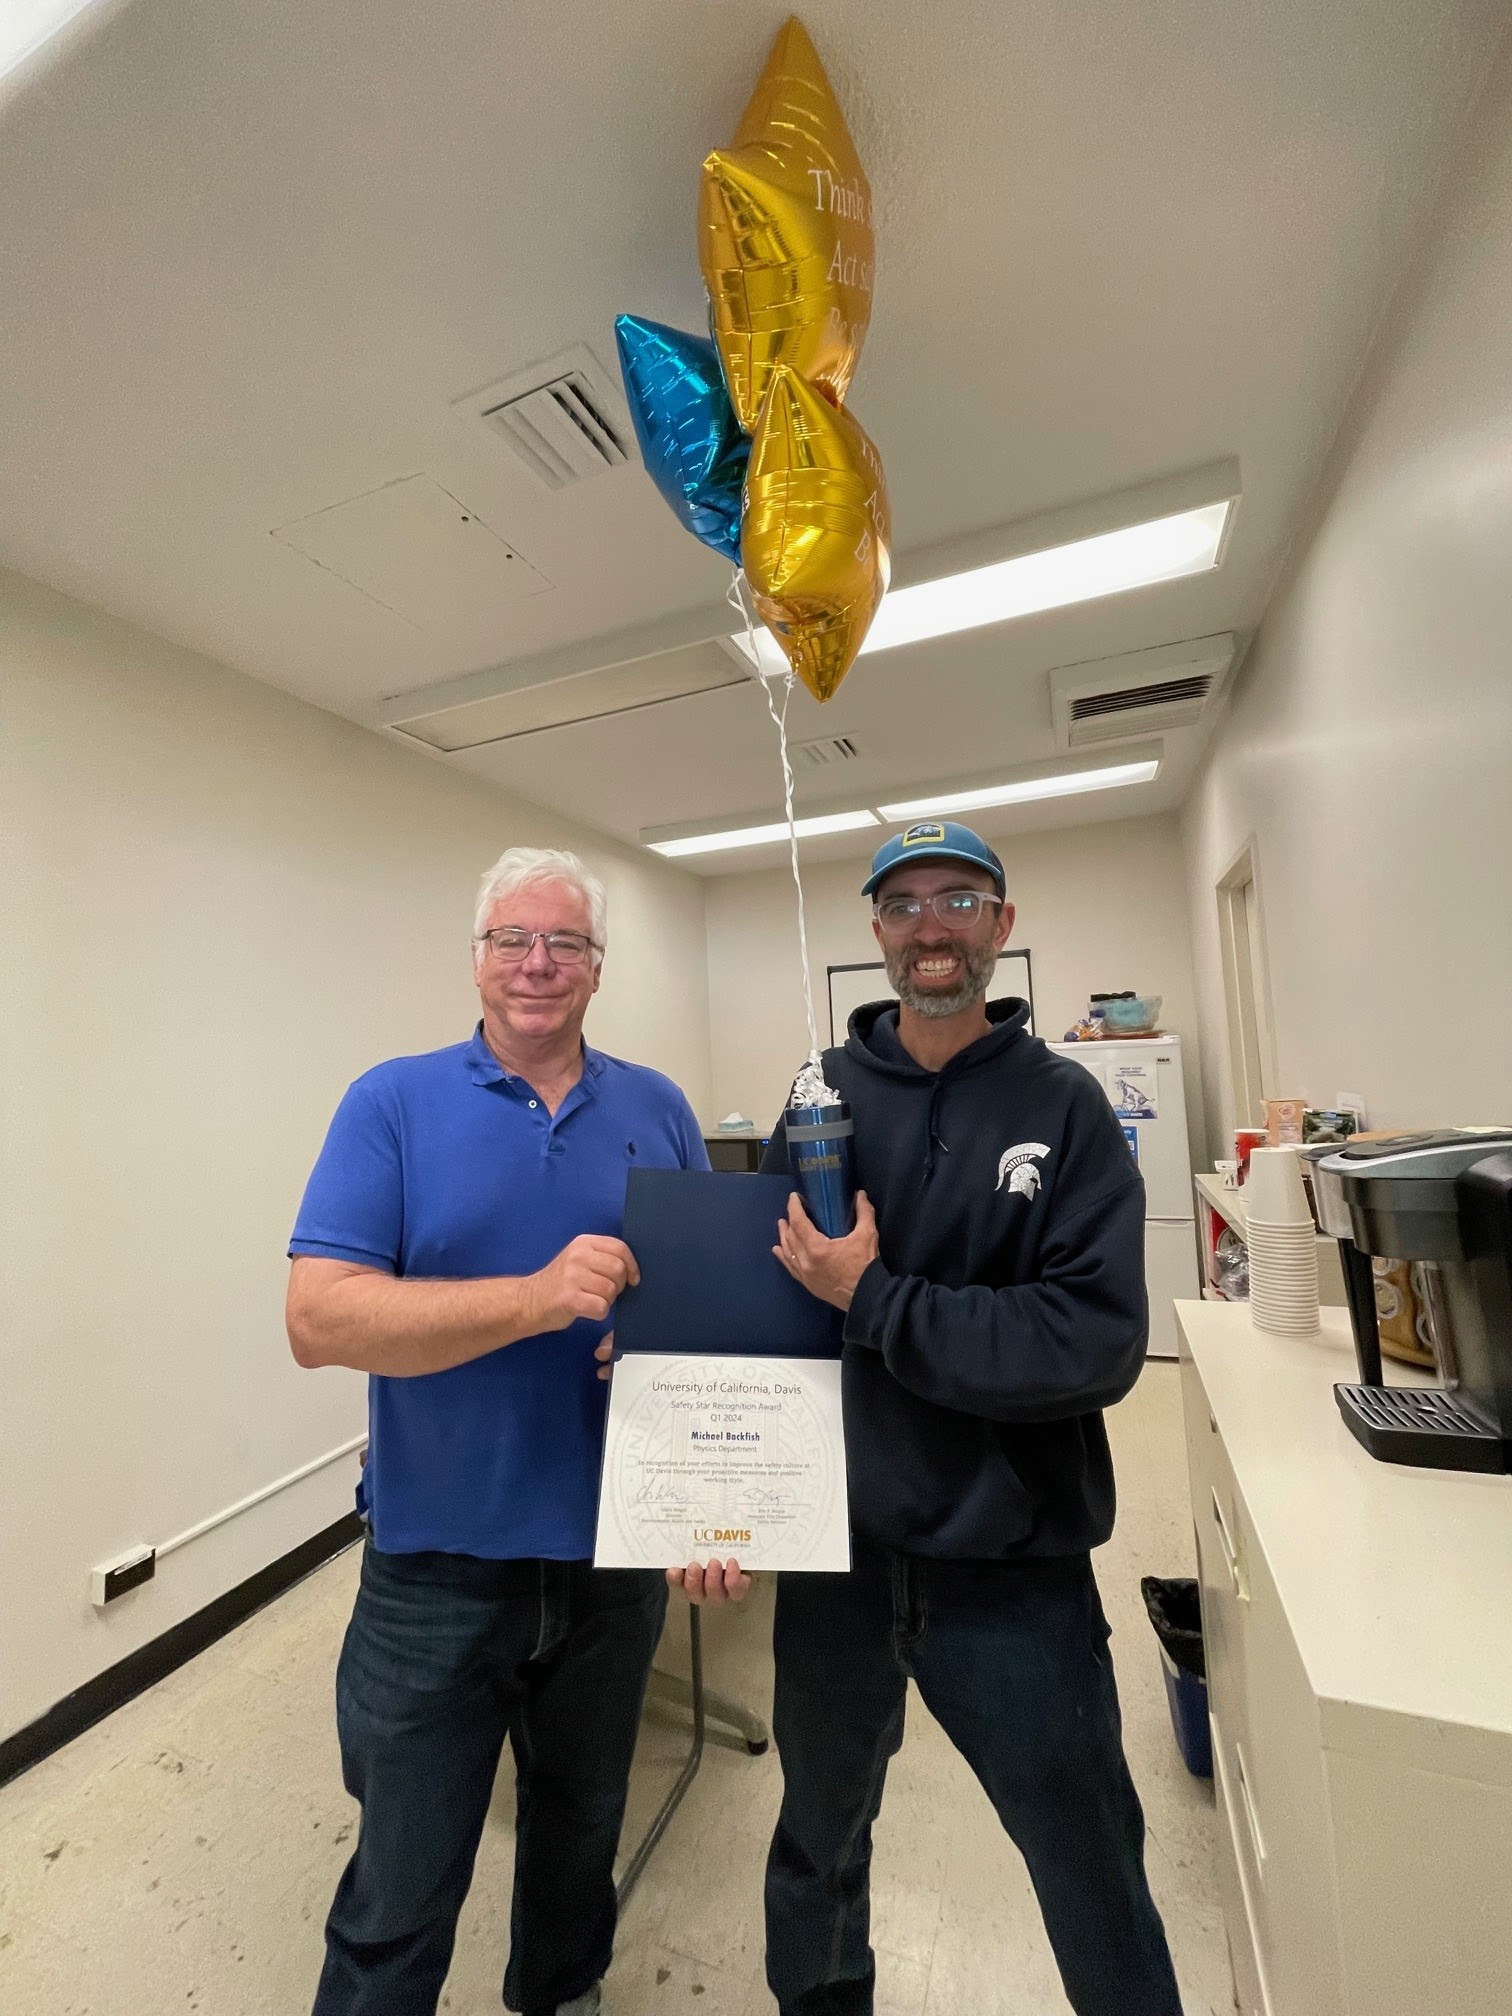 Michael Backfish is presented with the Safety Star award and some star-shaped blue and gold balloons.